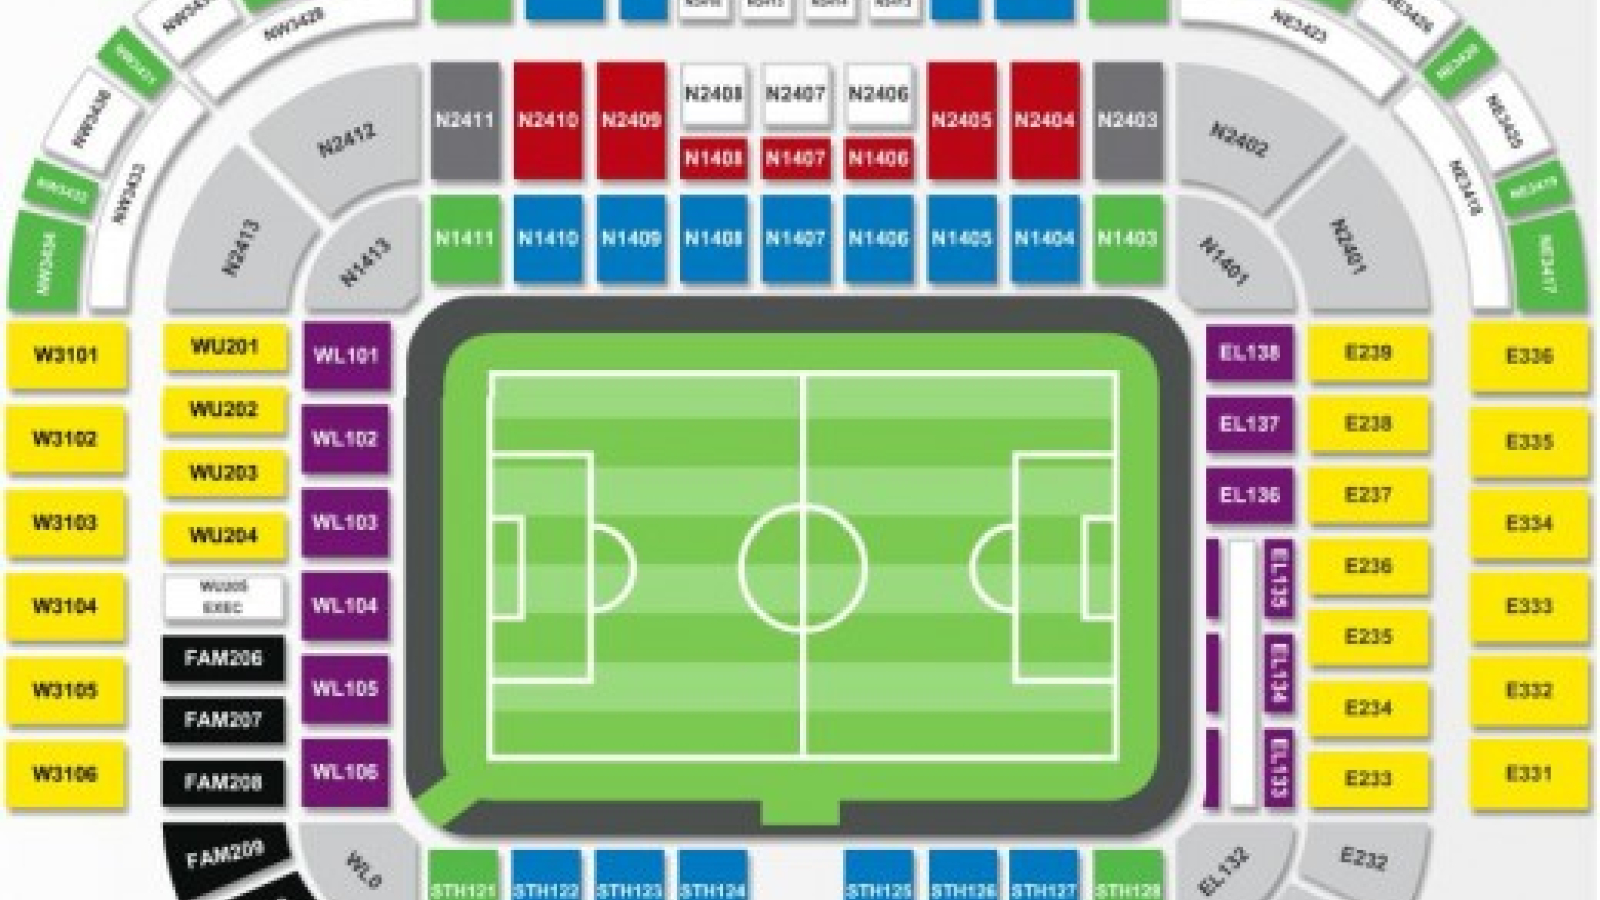 Tickets to see man utd at old trafford